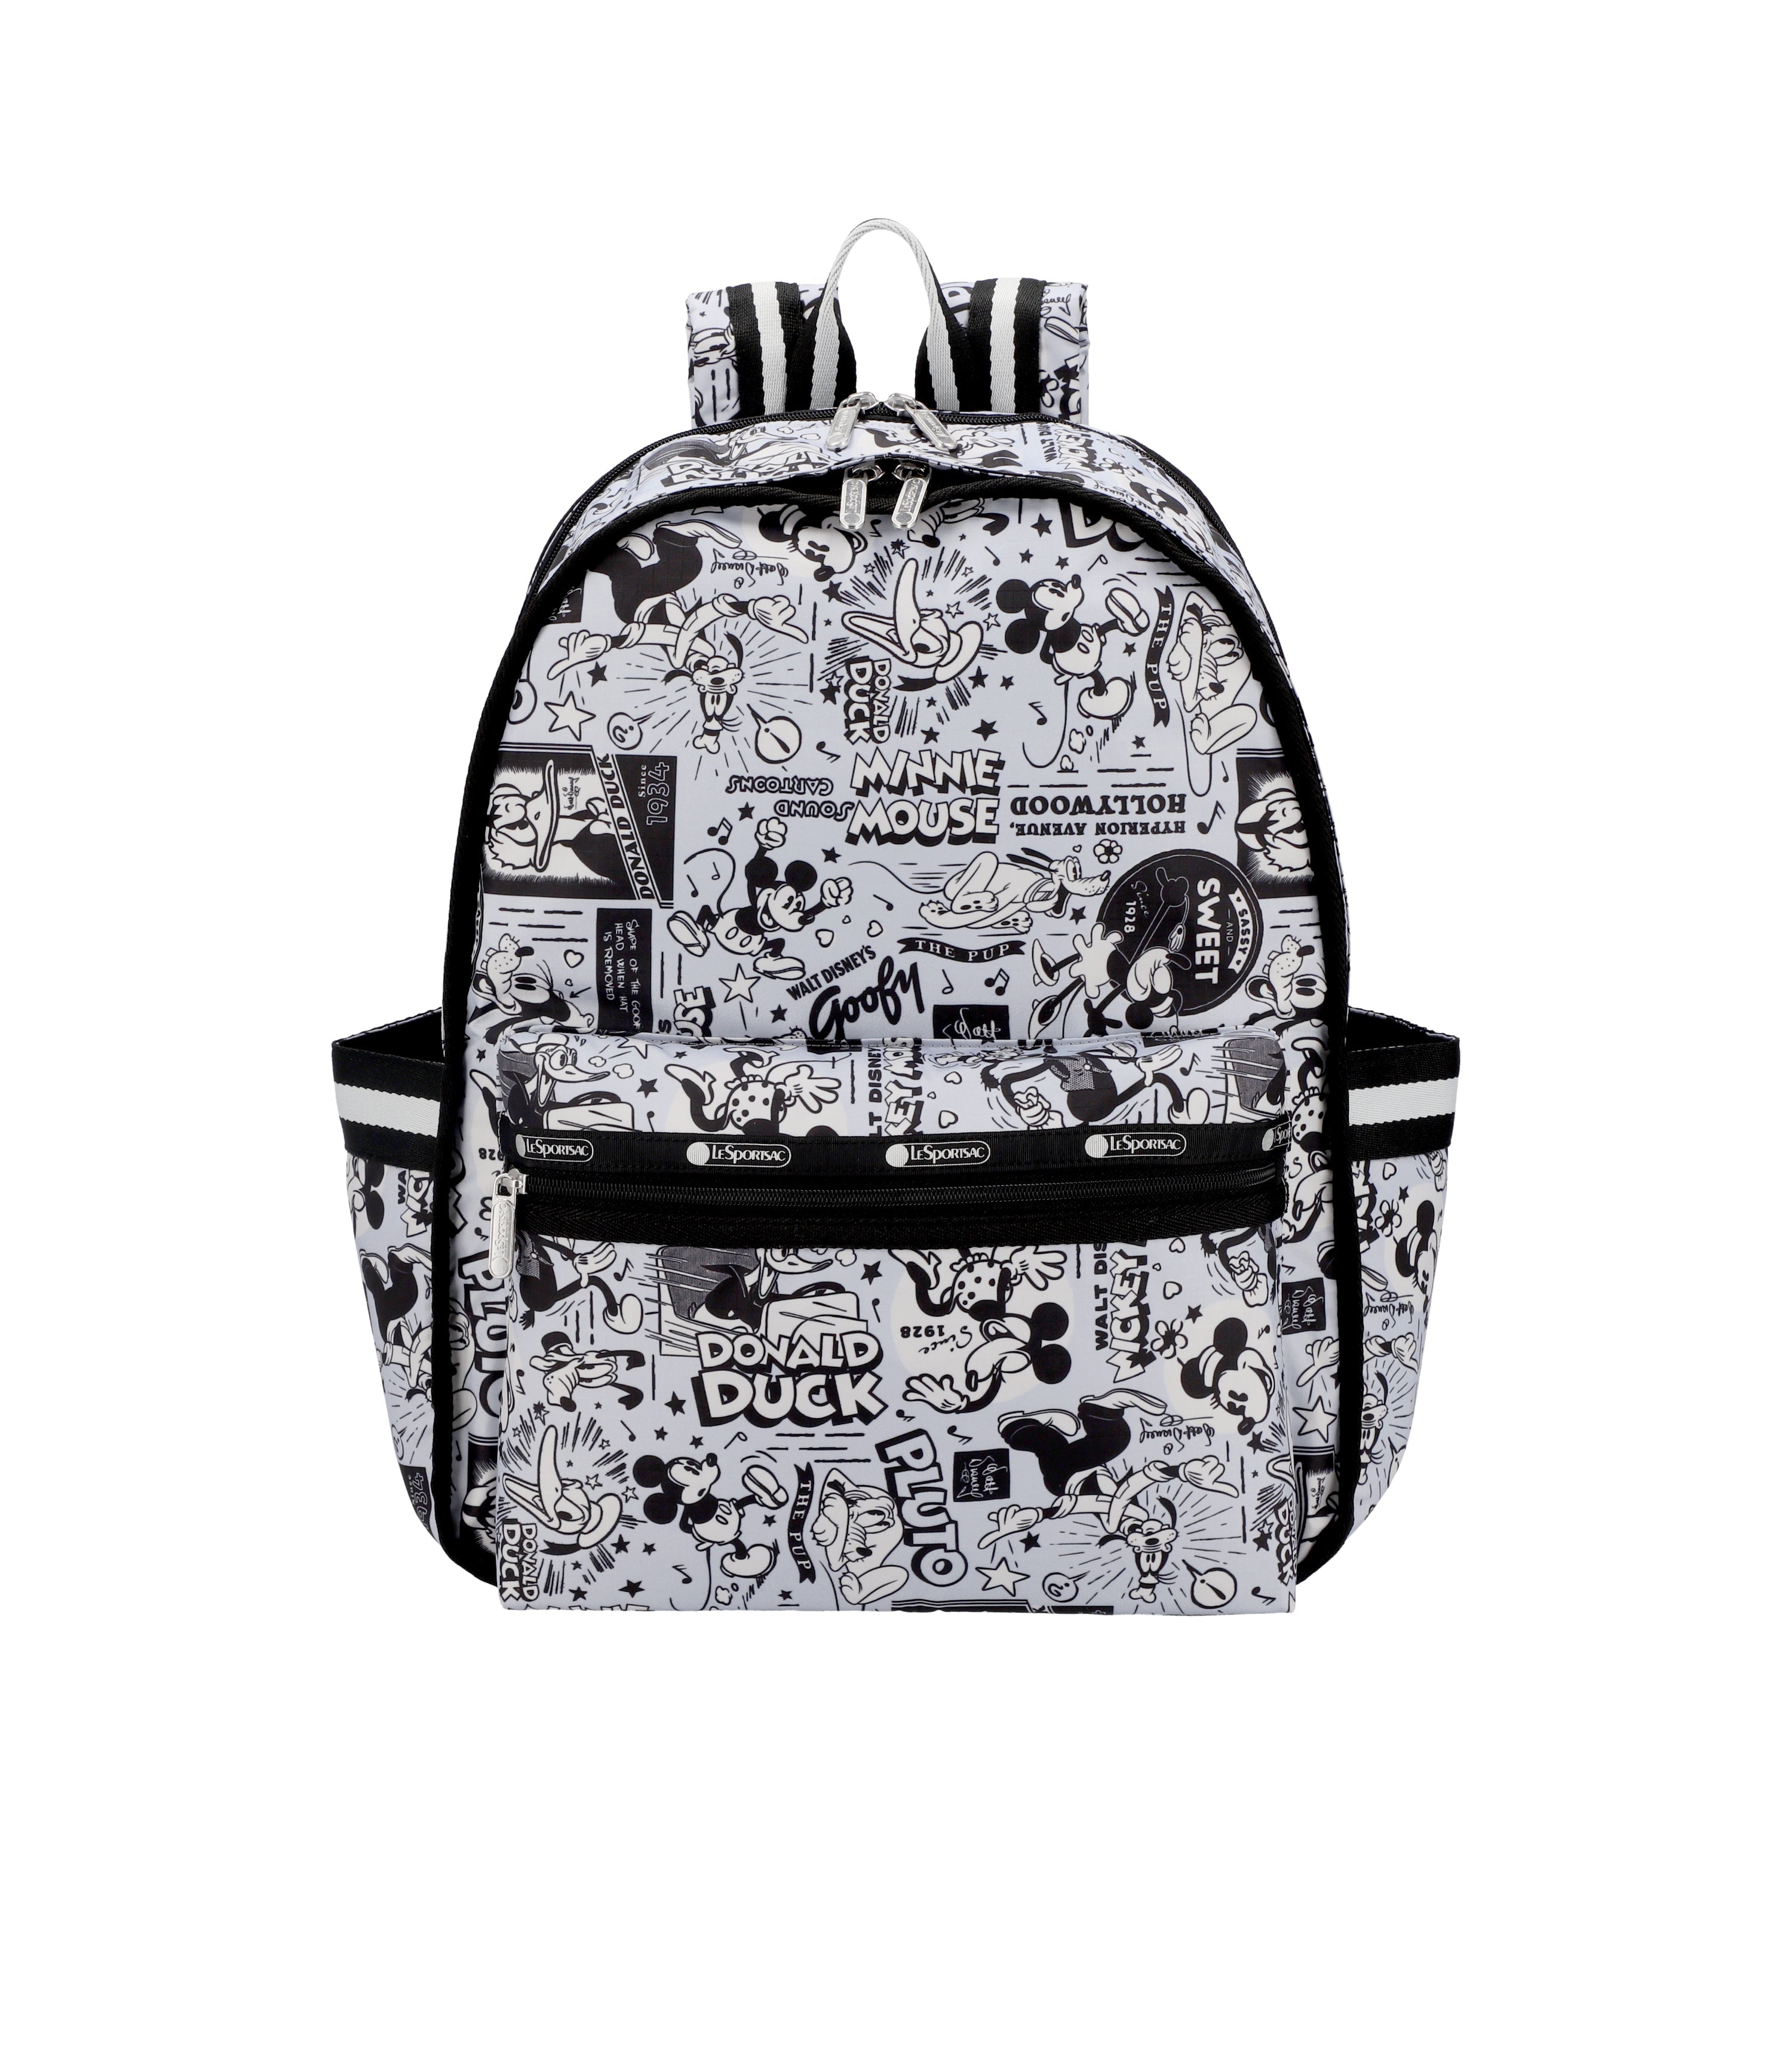 Route Backpack - Disney100 Friends